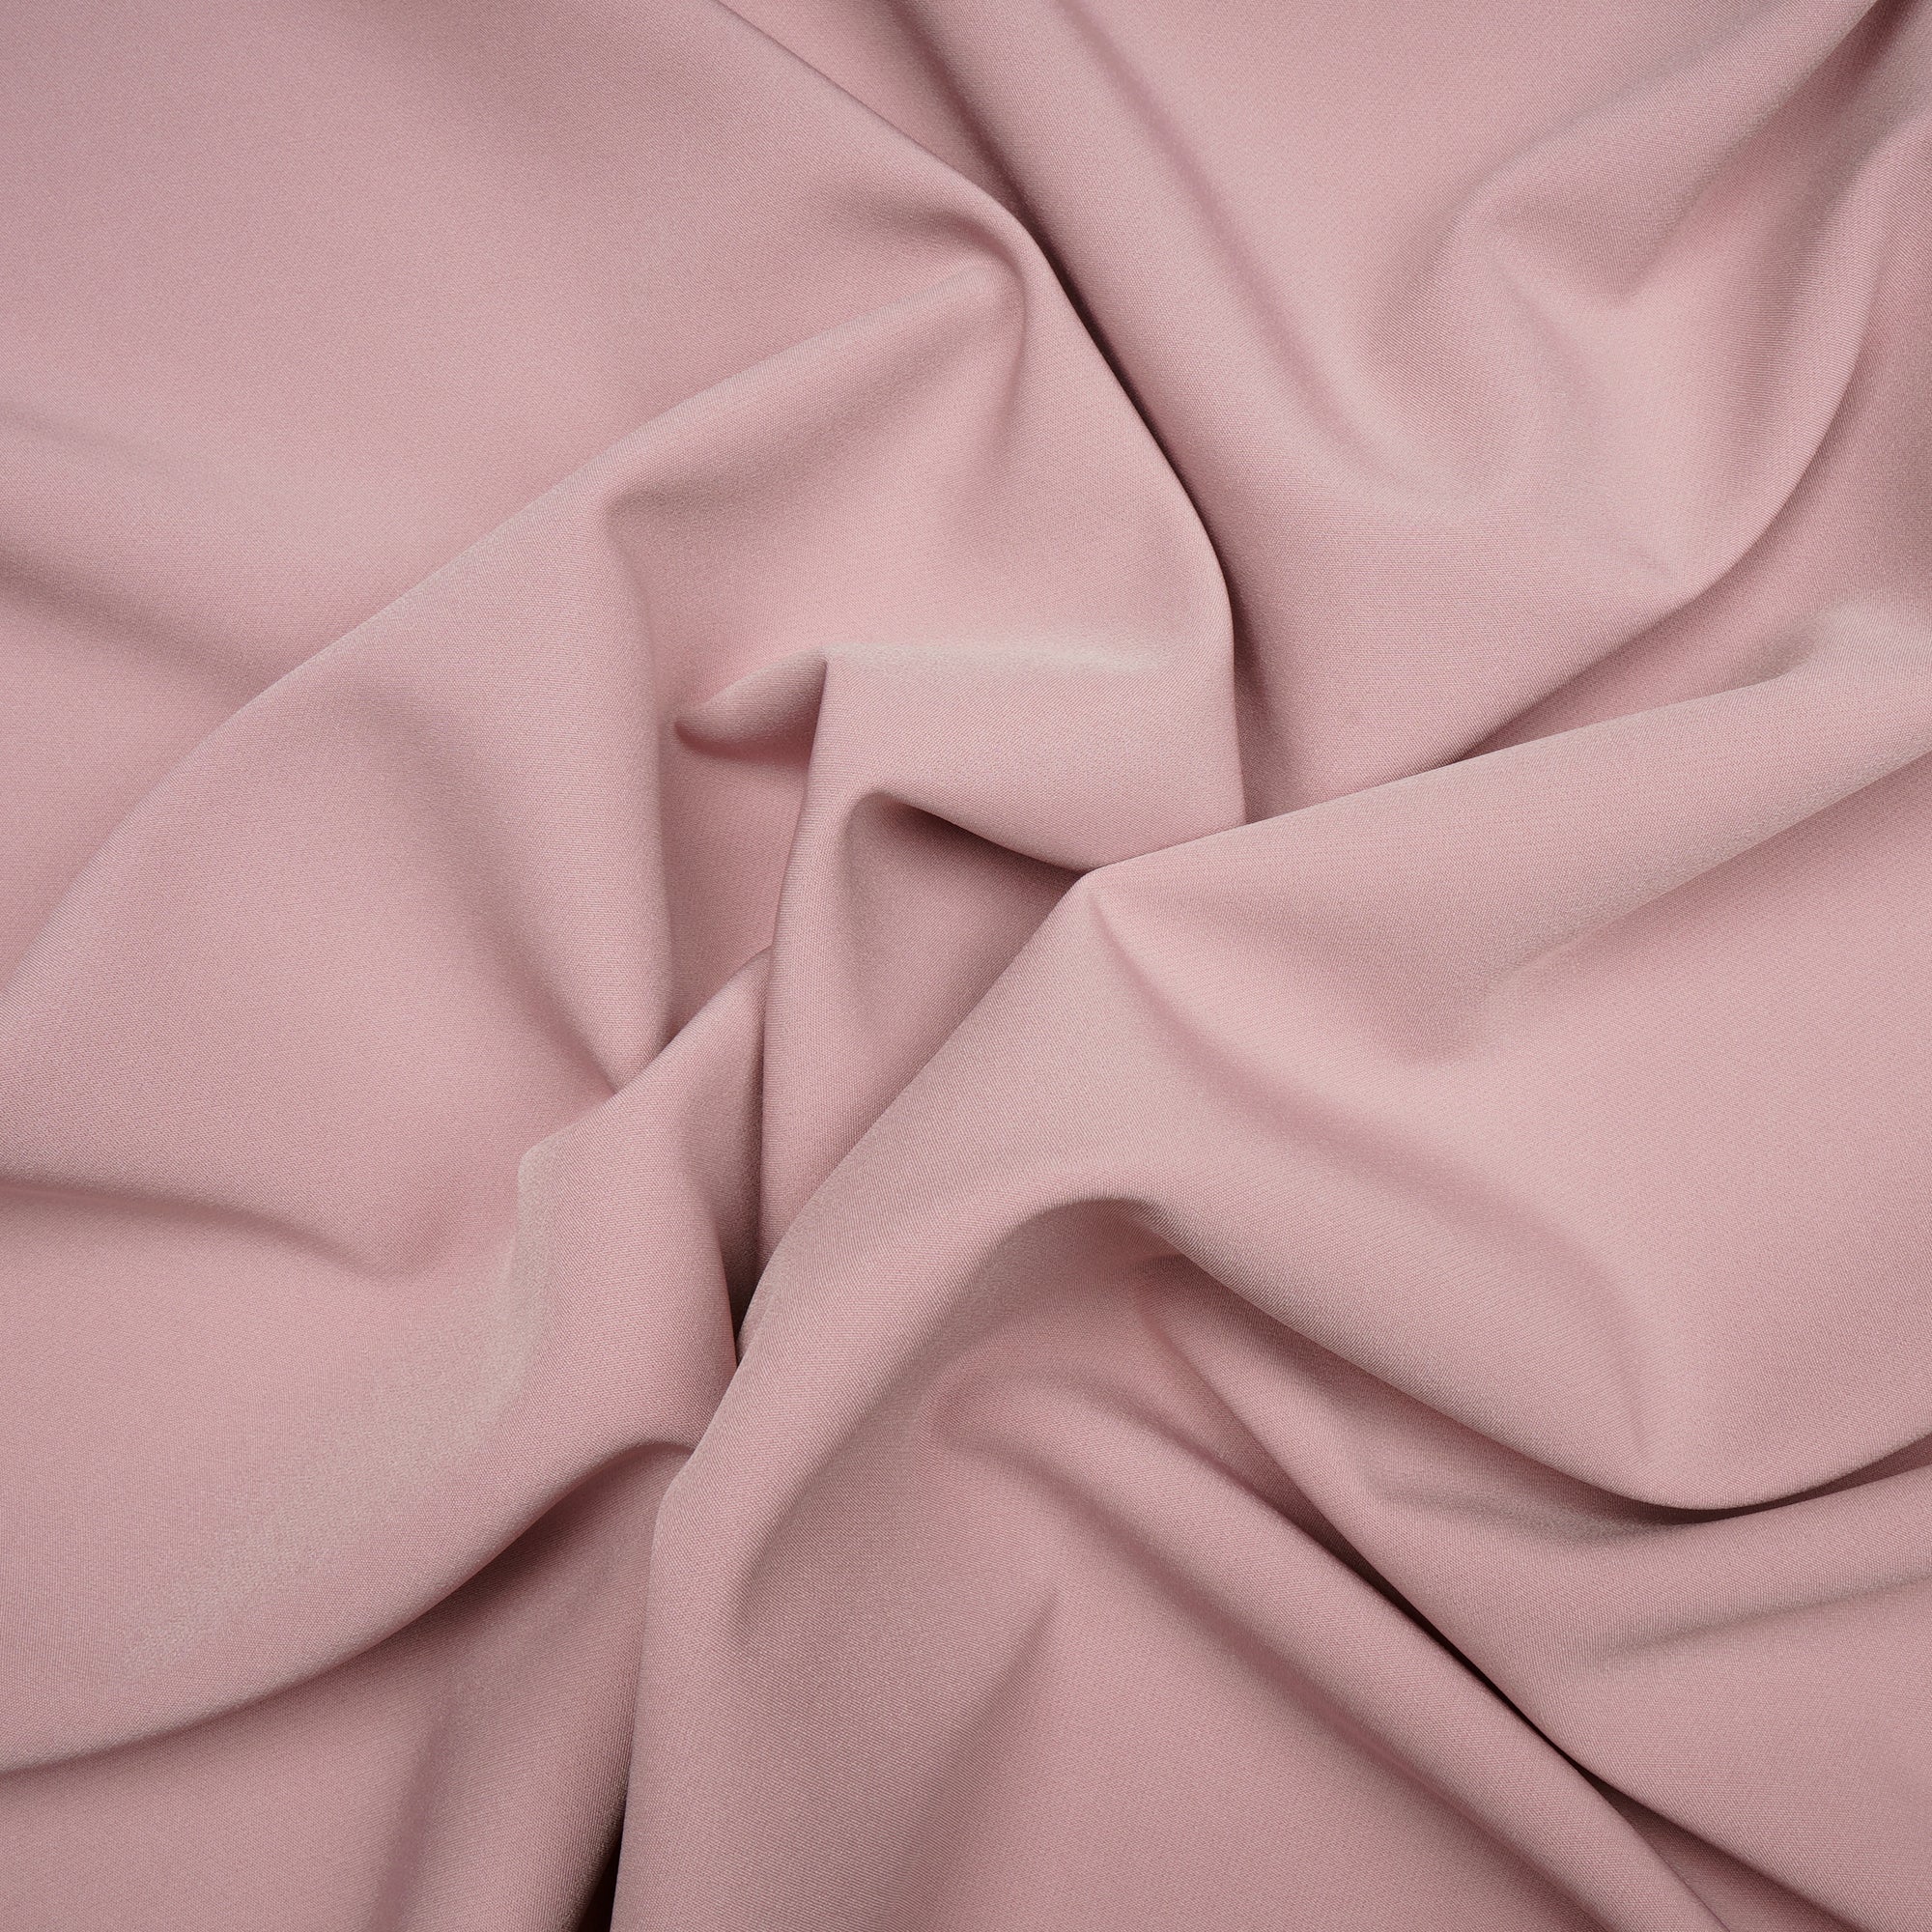 Peachskin Solid Dyed Imported Banana Crepe Fabric (60" Width)